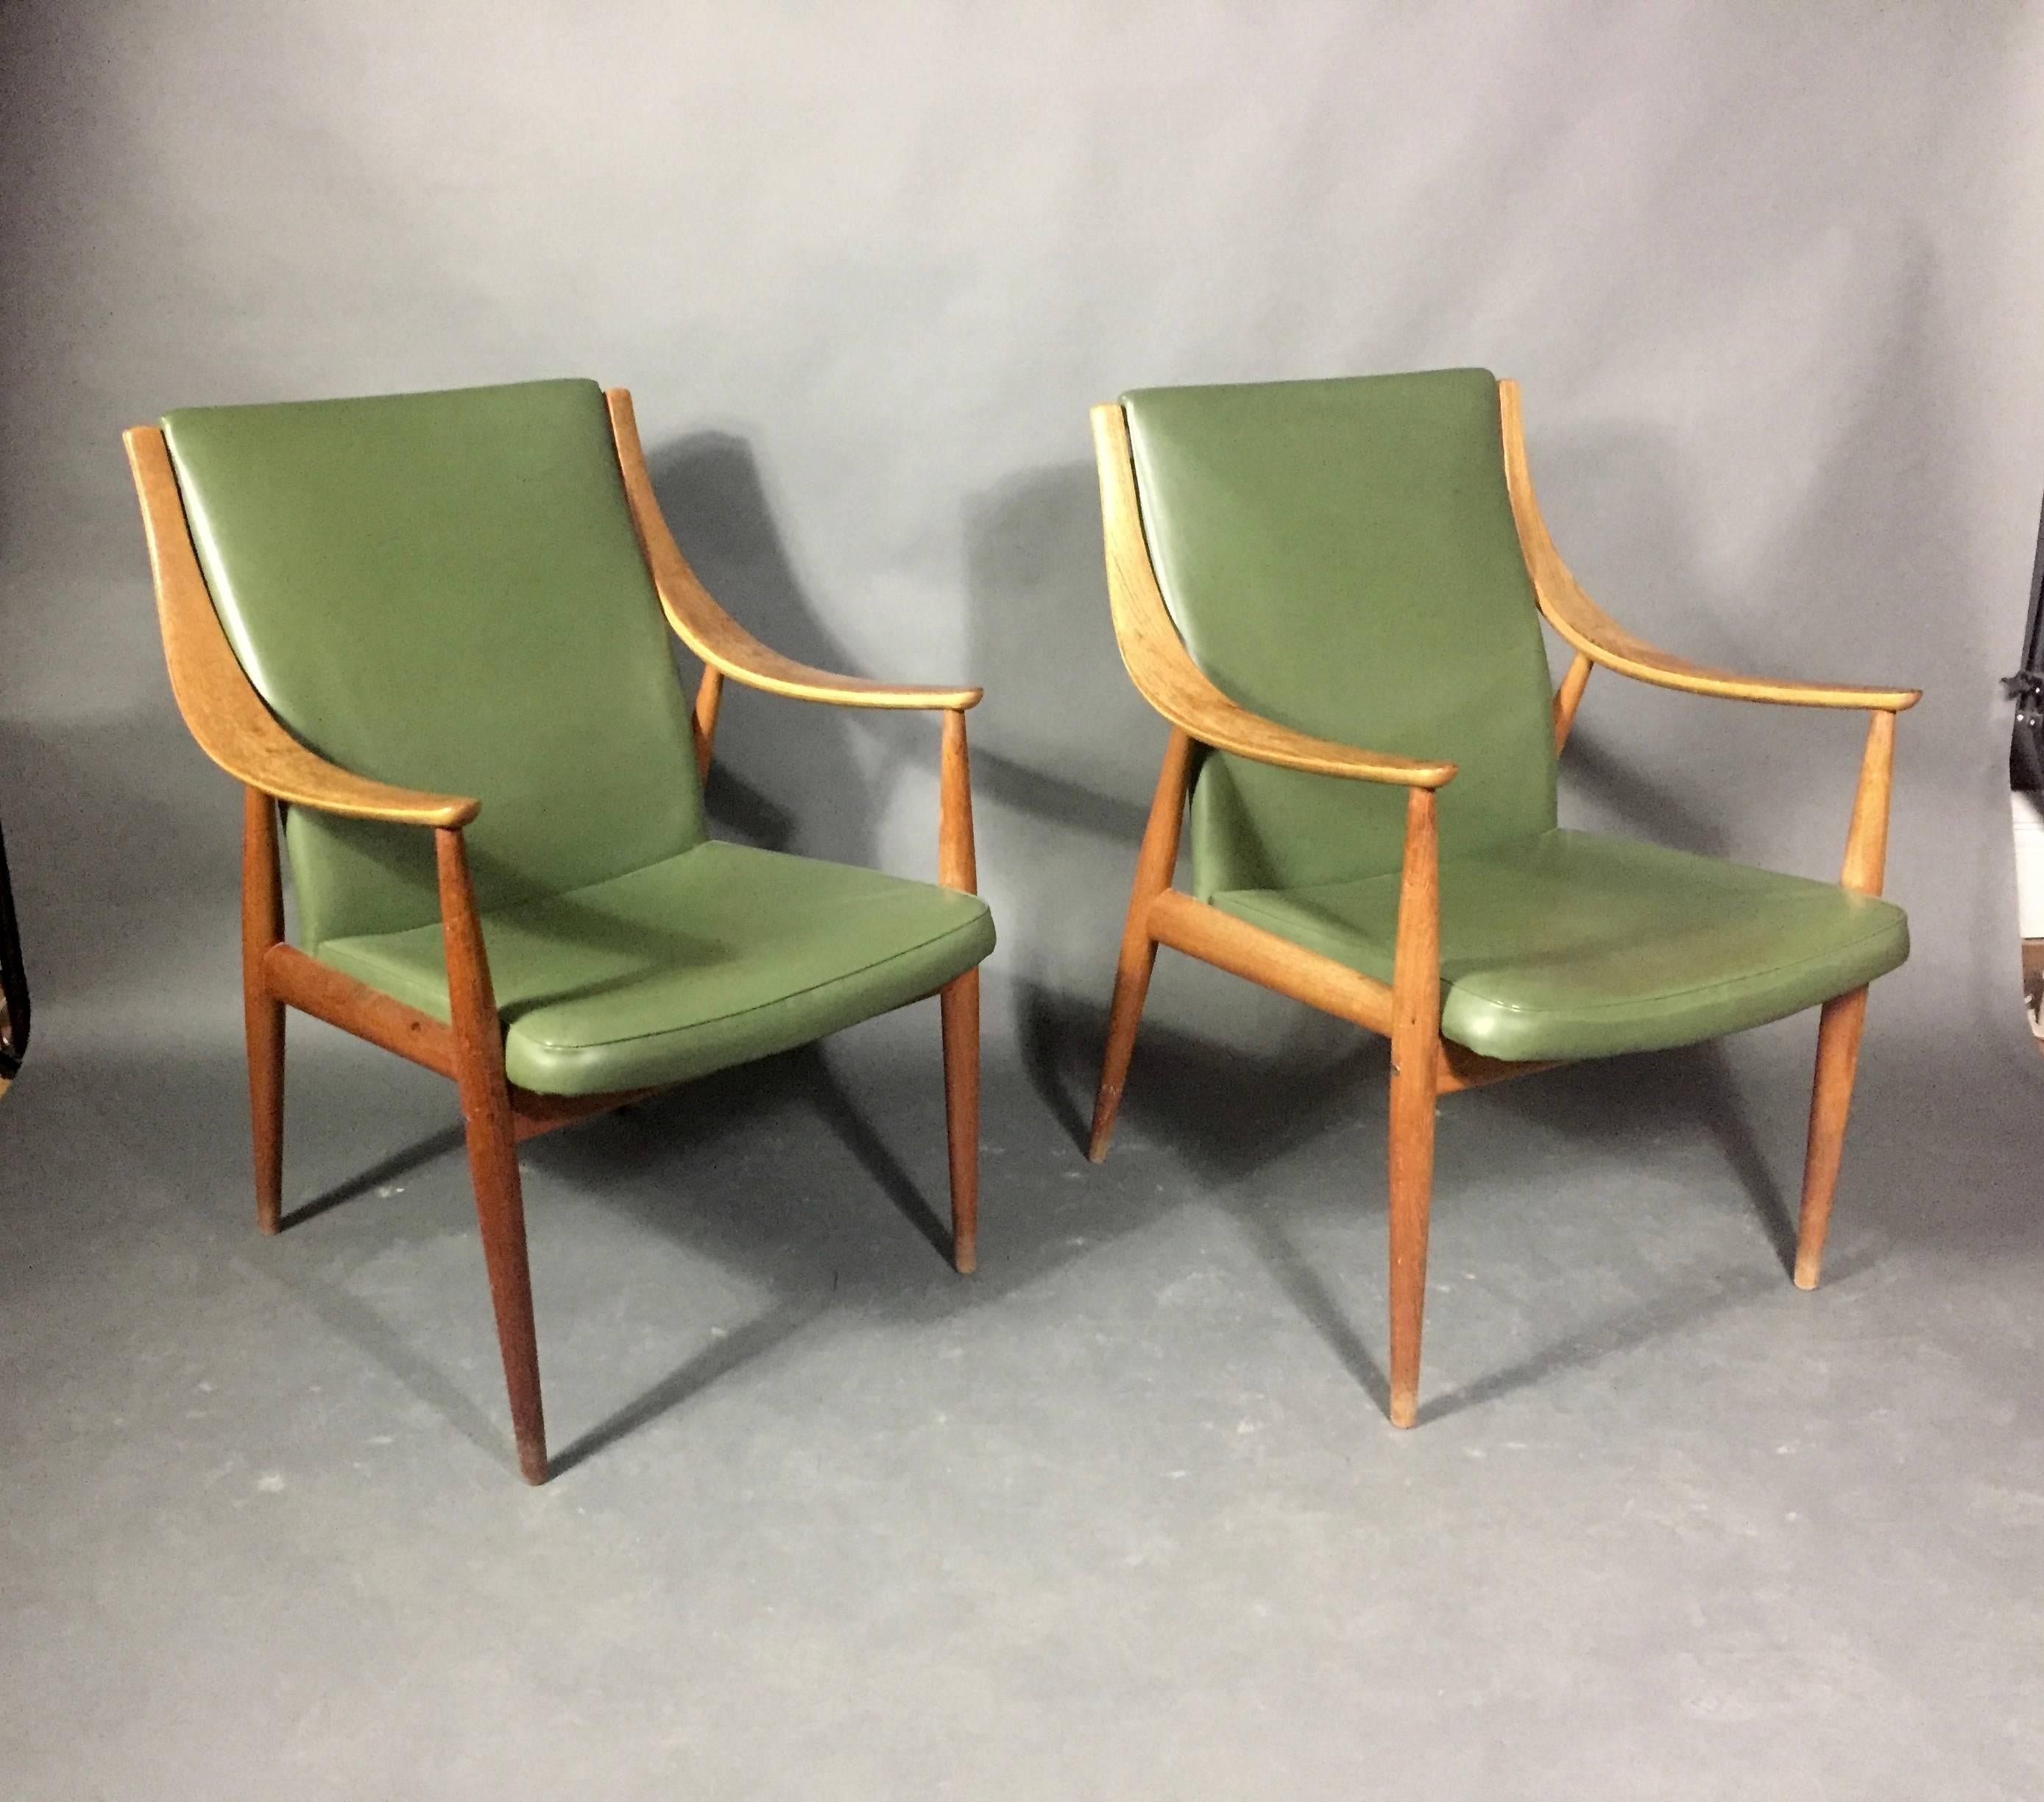 From the amazing Copenhagen-based architect and design team of Peter Hvidt & Orla Mølgaard-Nielsen, this pair of 